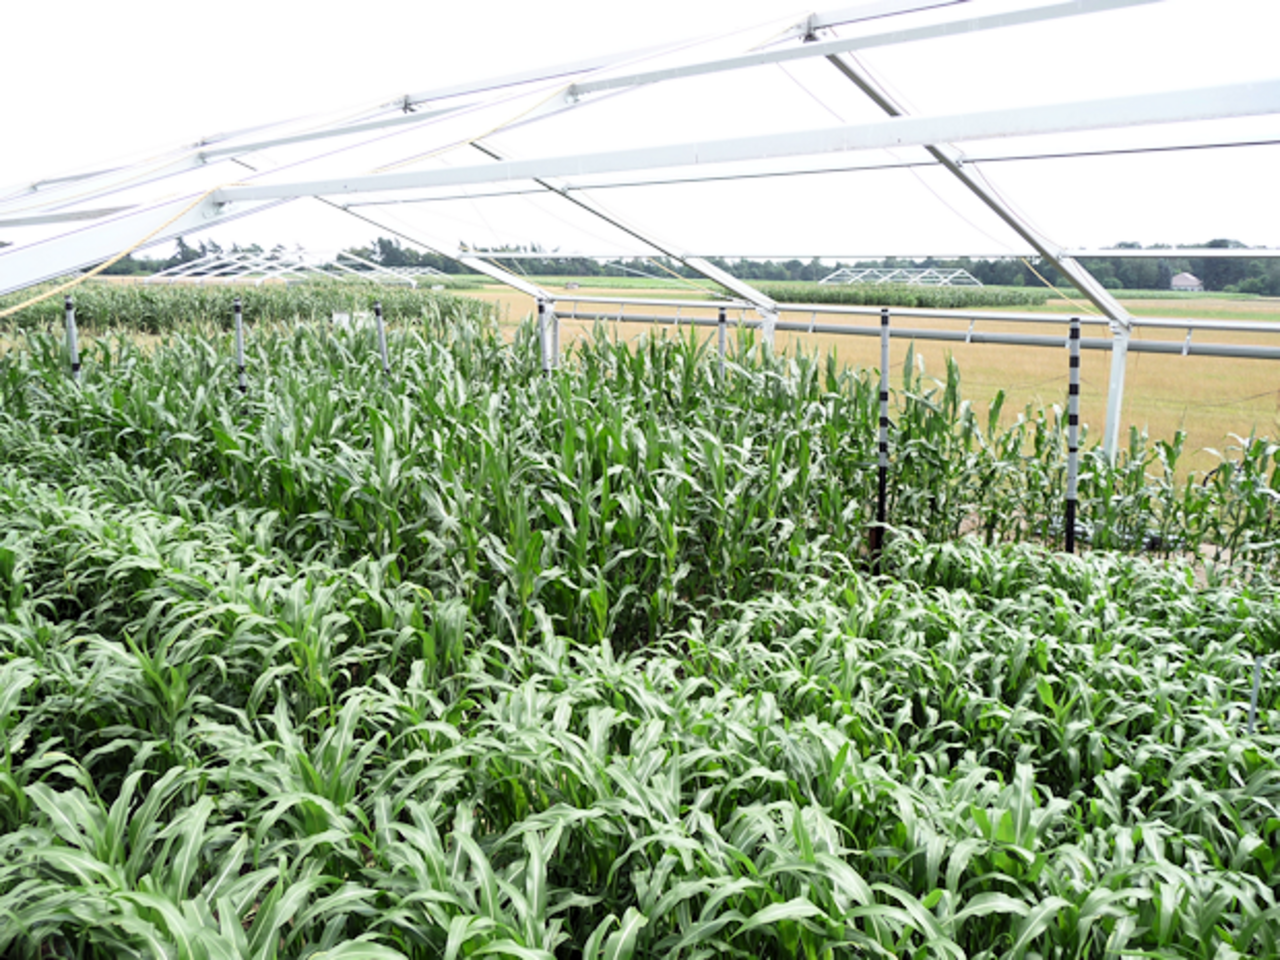 Plots with maize and different sorghum cultivars within a FACE (free air CO2 enrichment) ring combined with rain shelter for simulation of summer drought